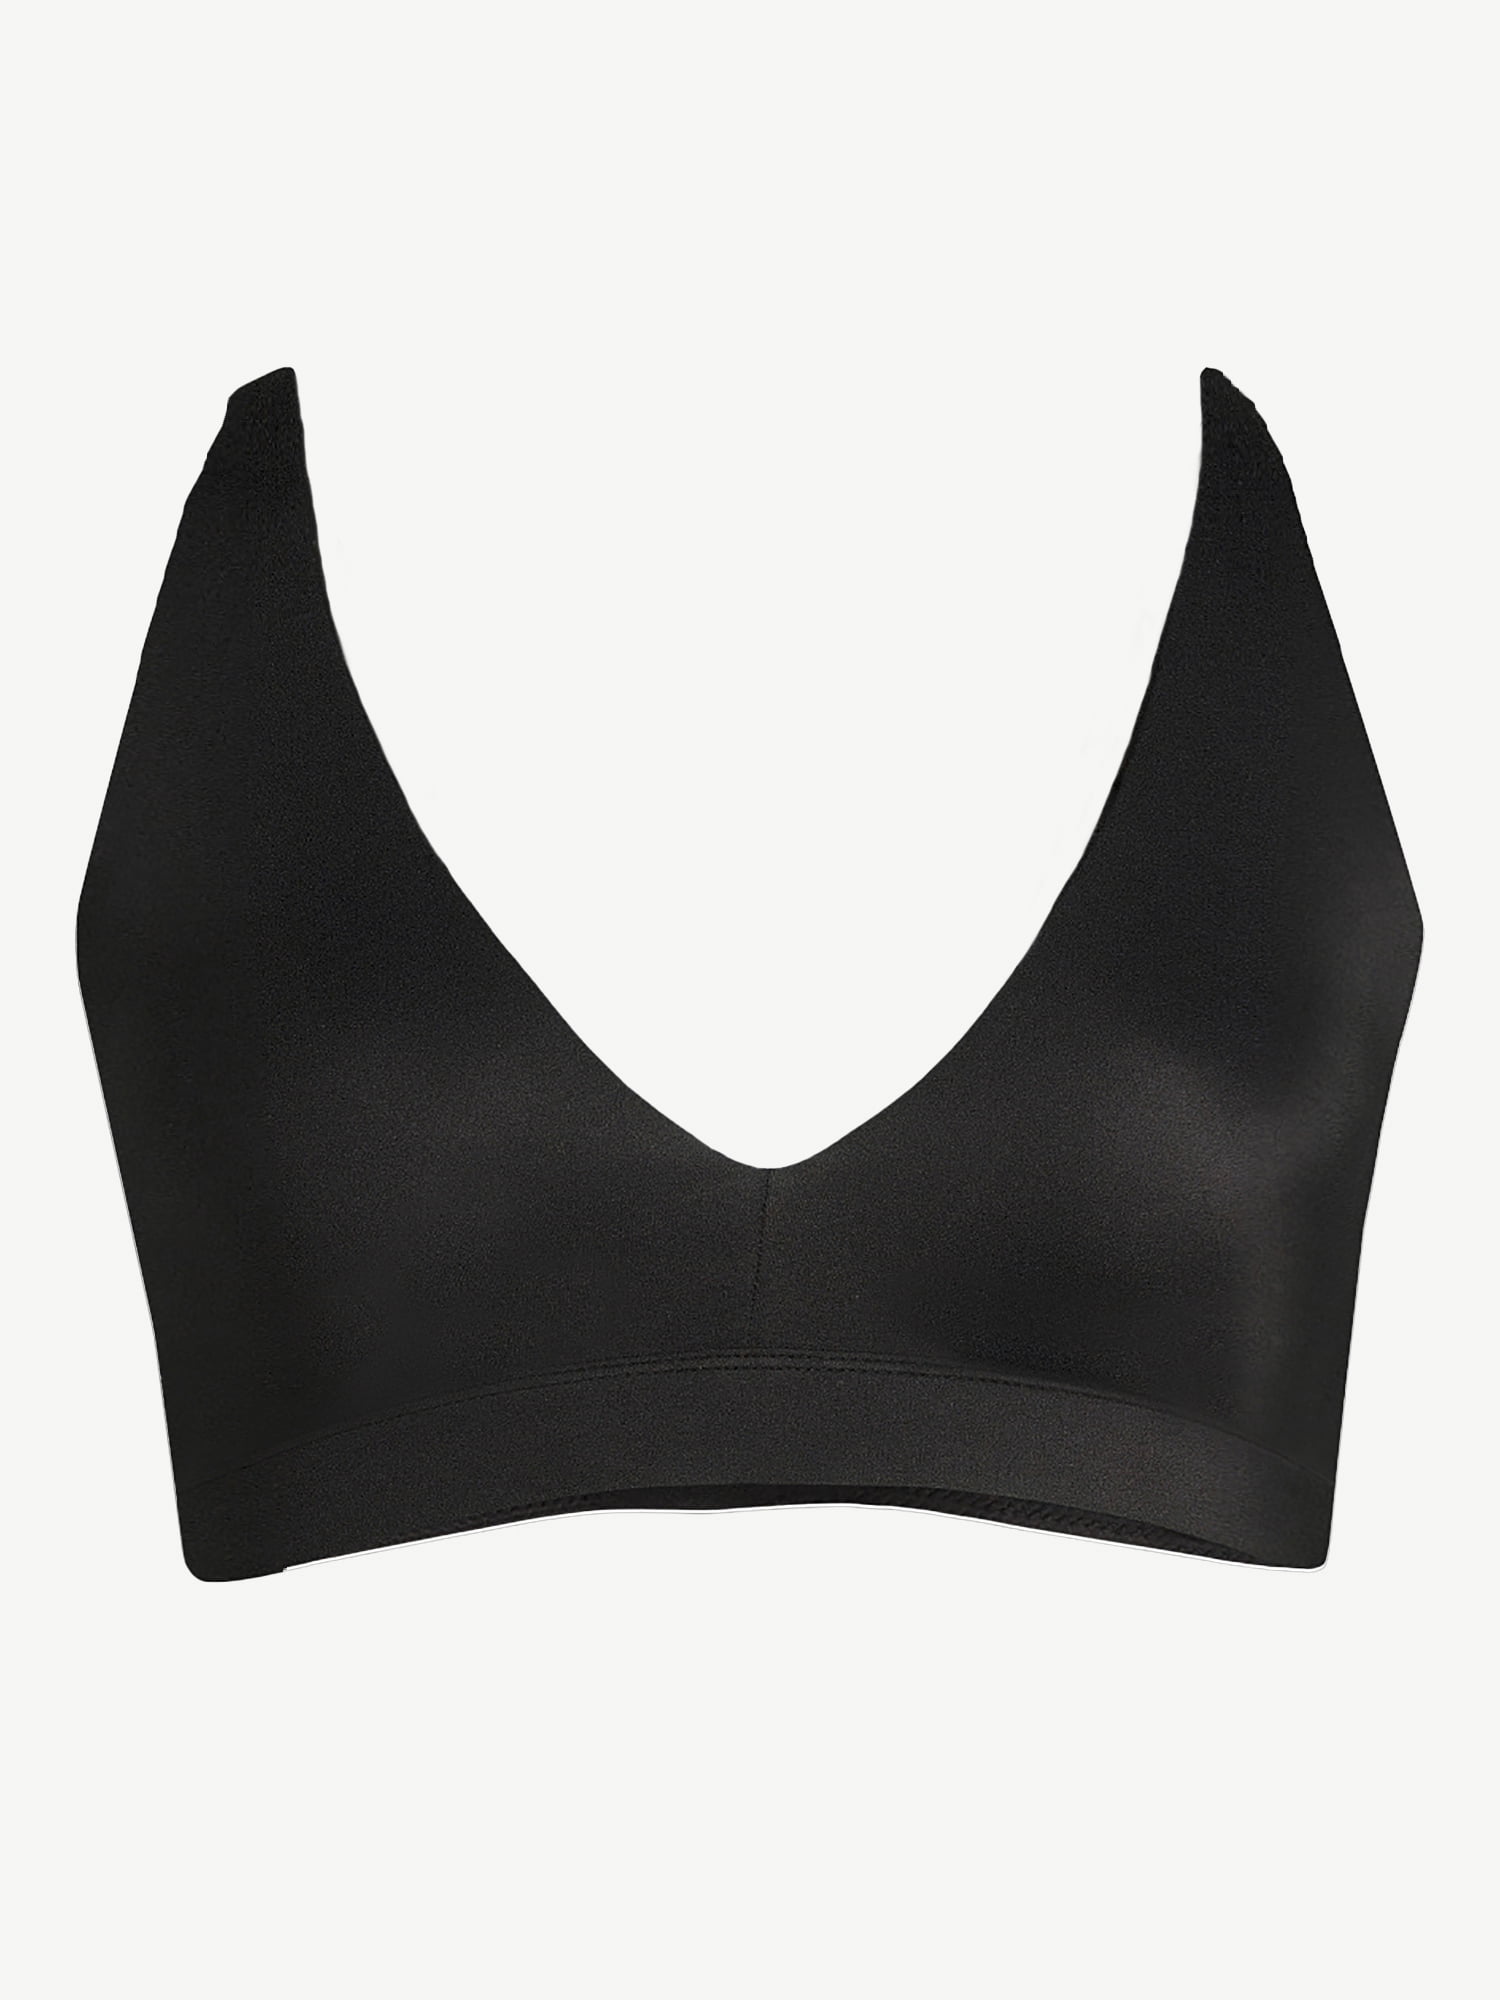 Clukuo Sports Bras for Women Ribbed Knit Padded Wirefree Bralette